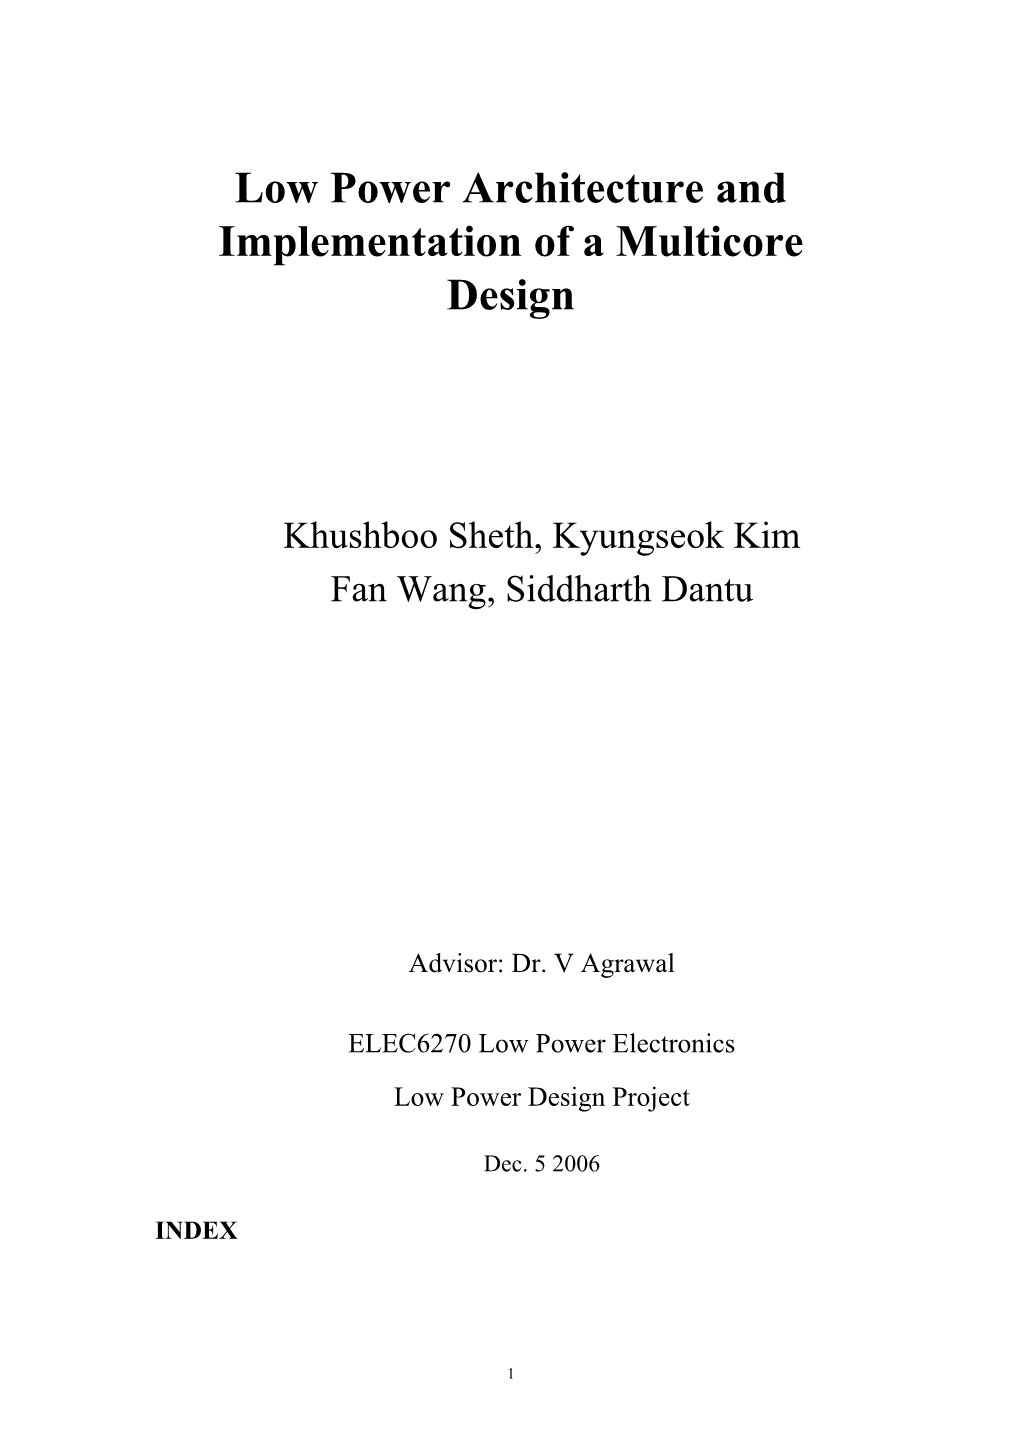 Low Power Architecture and Implementation of a Multicore Design